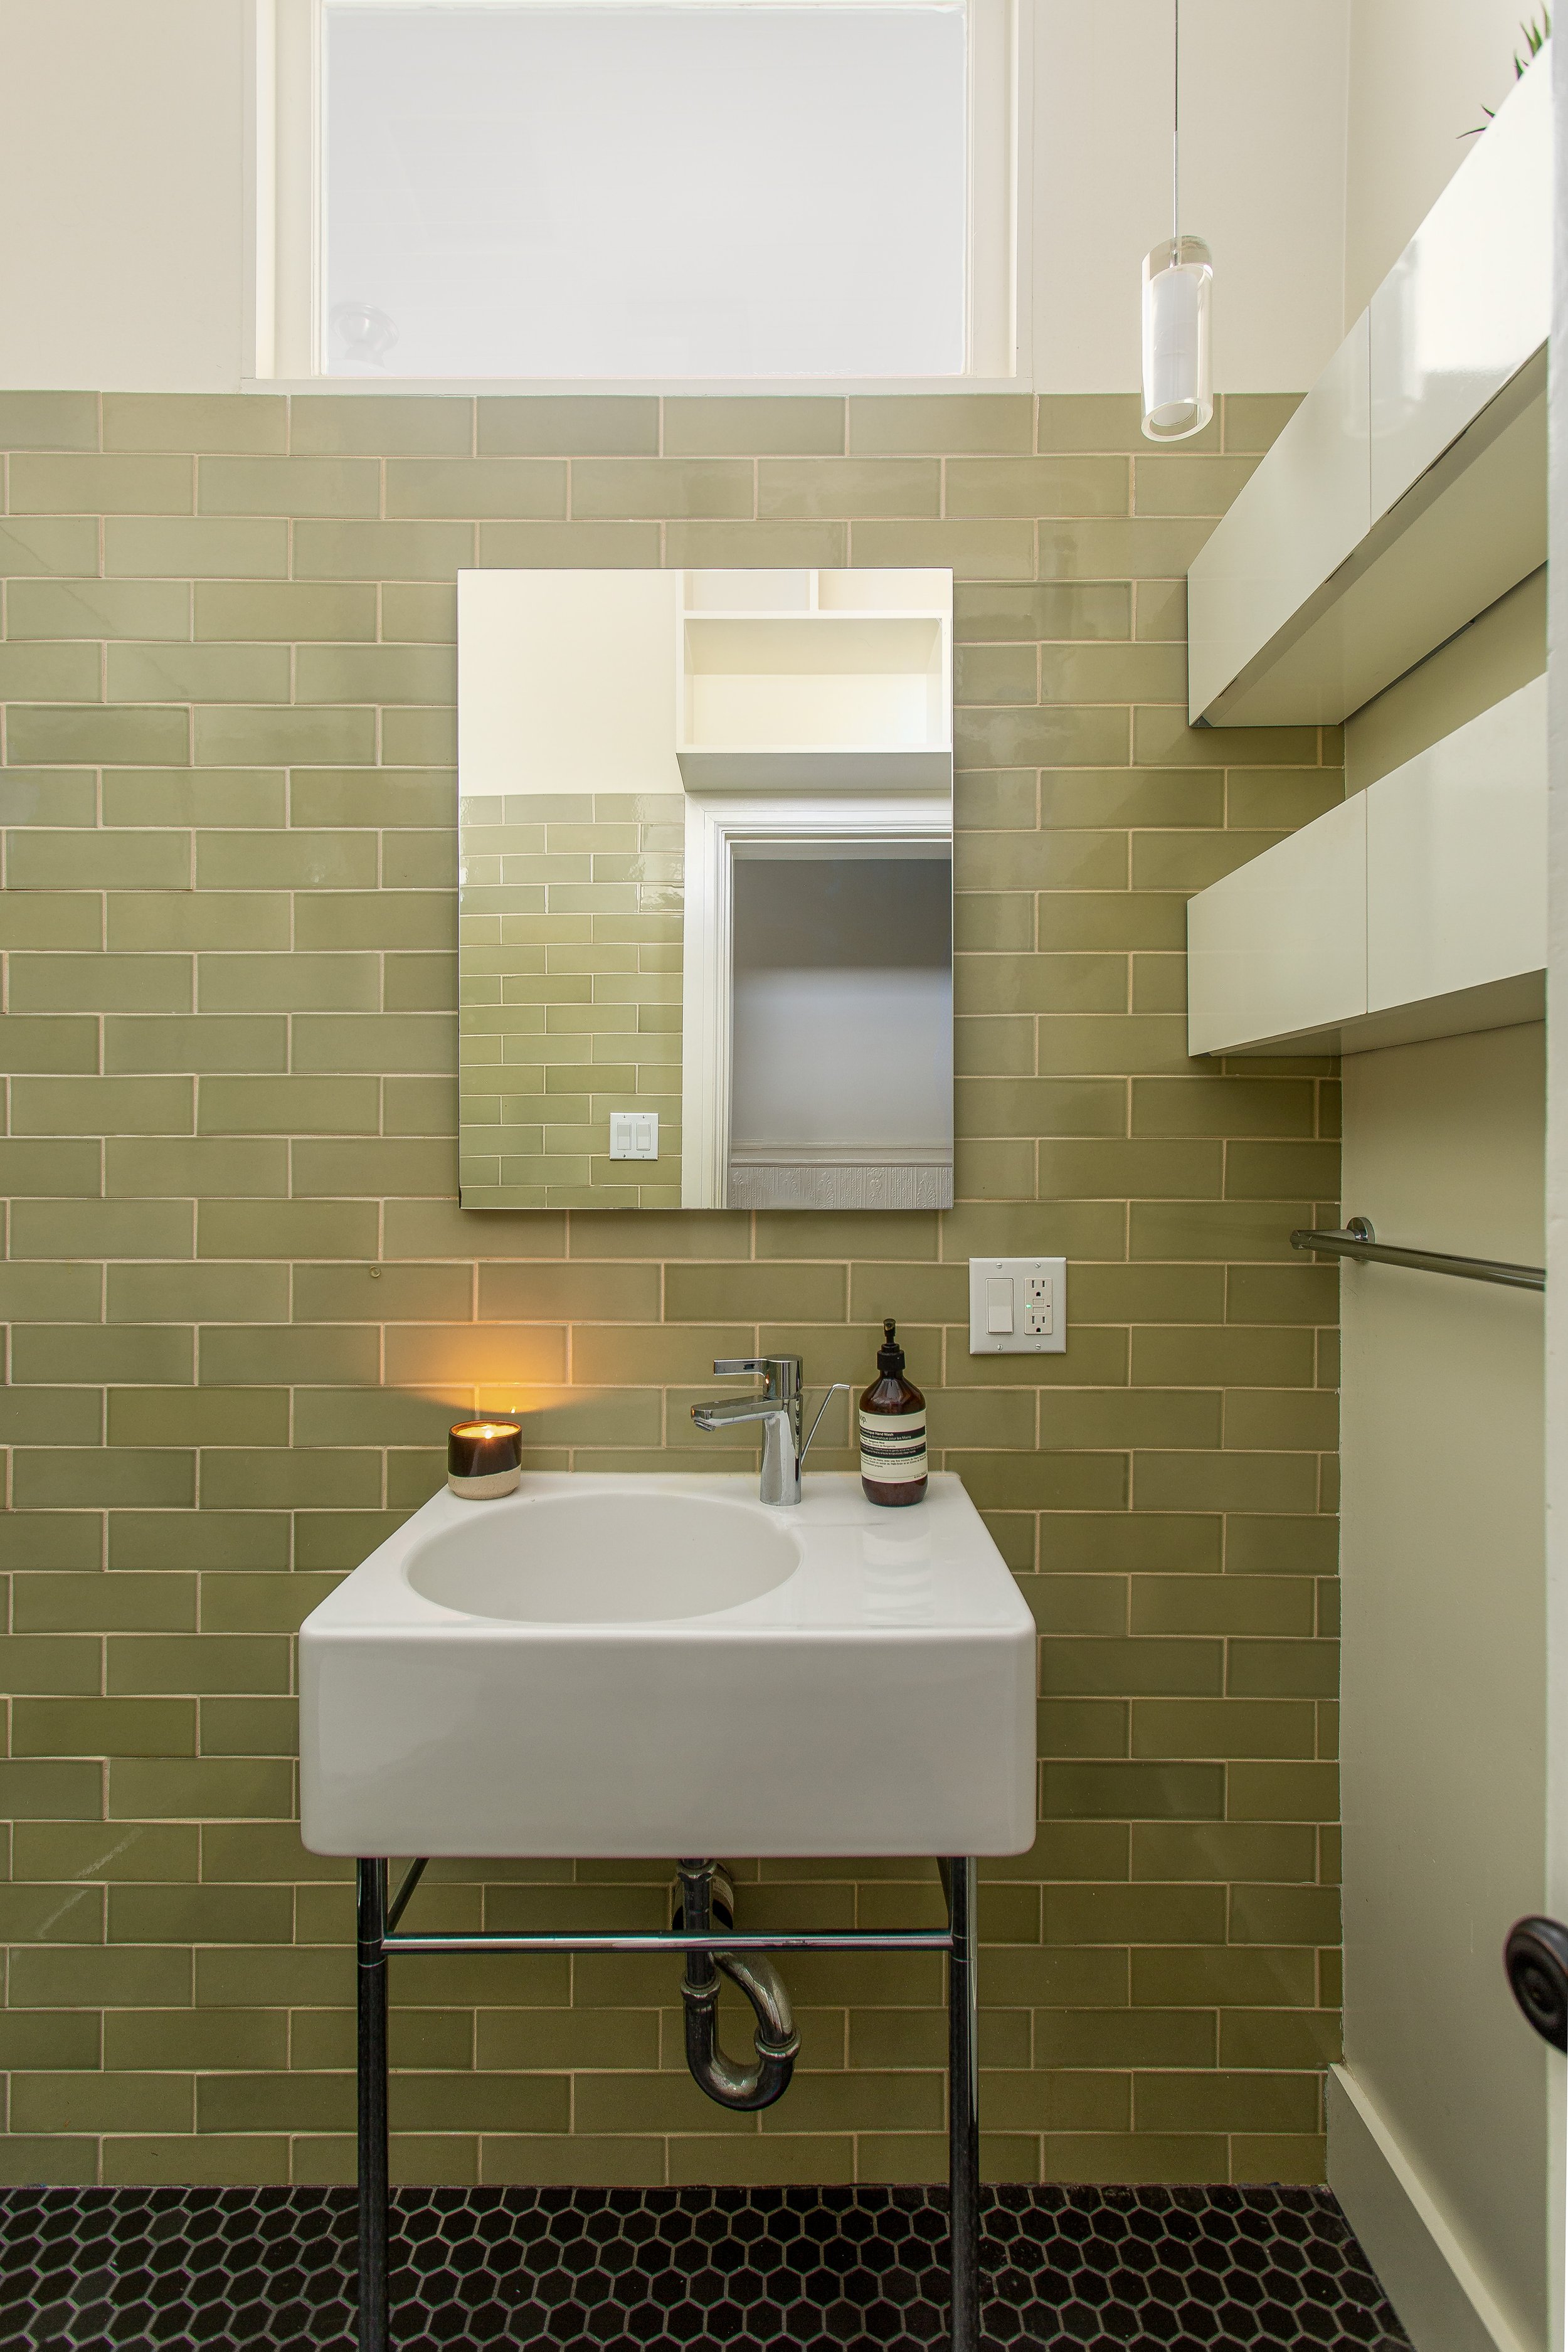 Bathroom with Olive Colored Tiles and a Candle